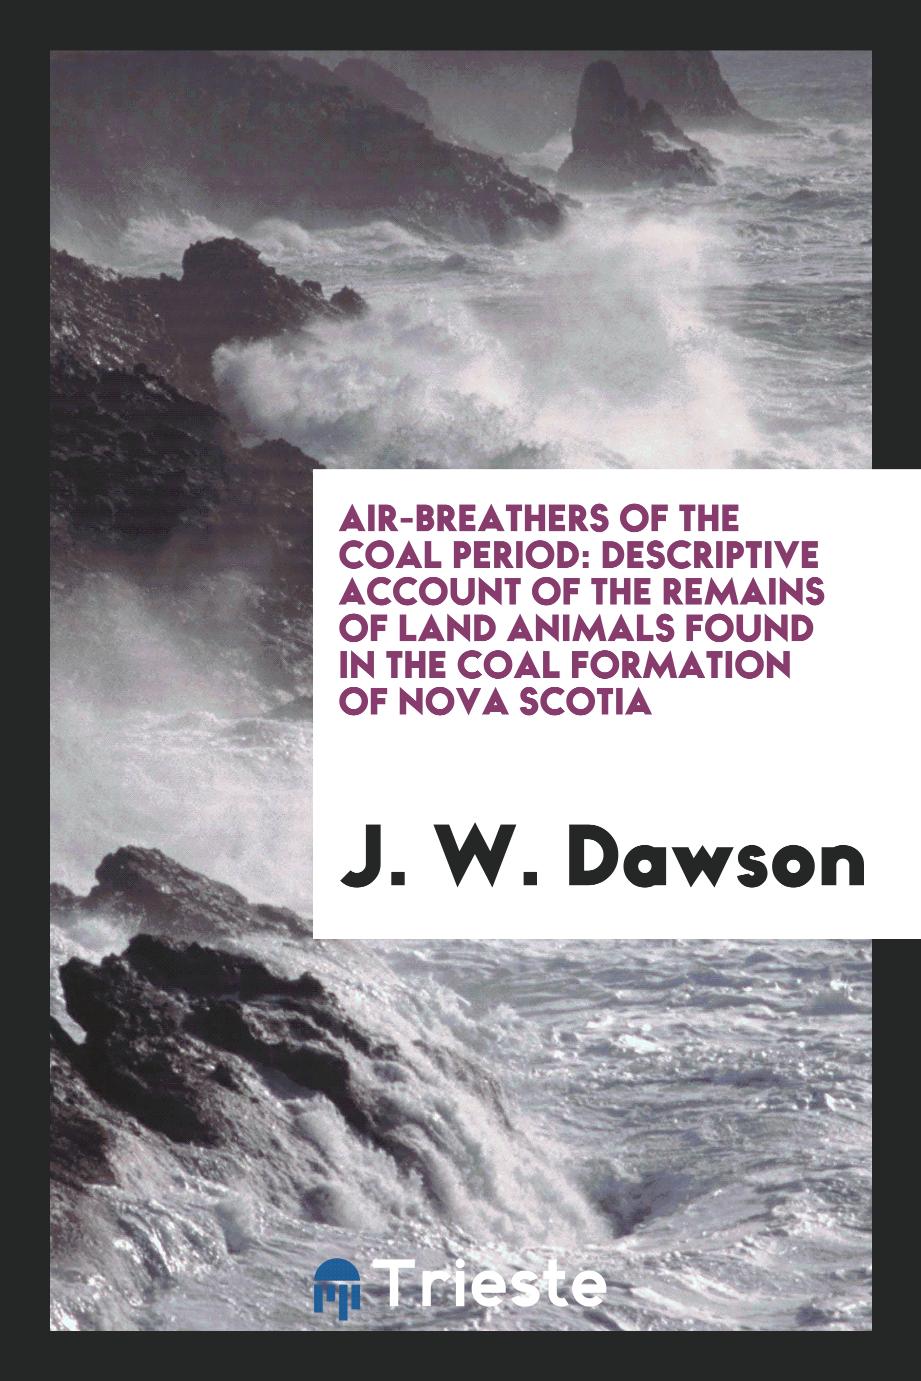 Air-breathers of the Coal Period: Descriptive Account of the Remains of Land Animals Found in the Coal Formation of Nova Scotia